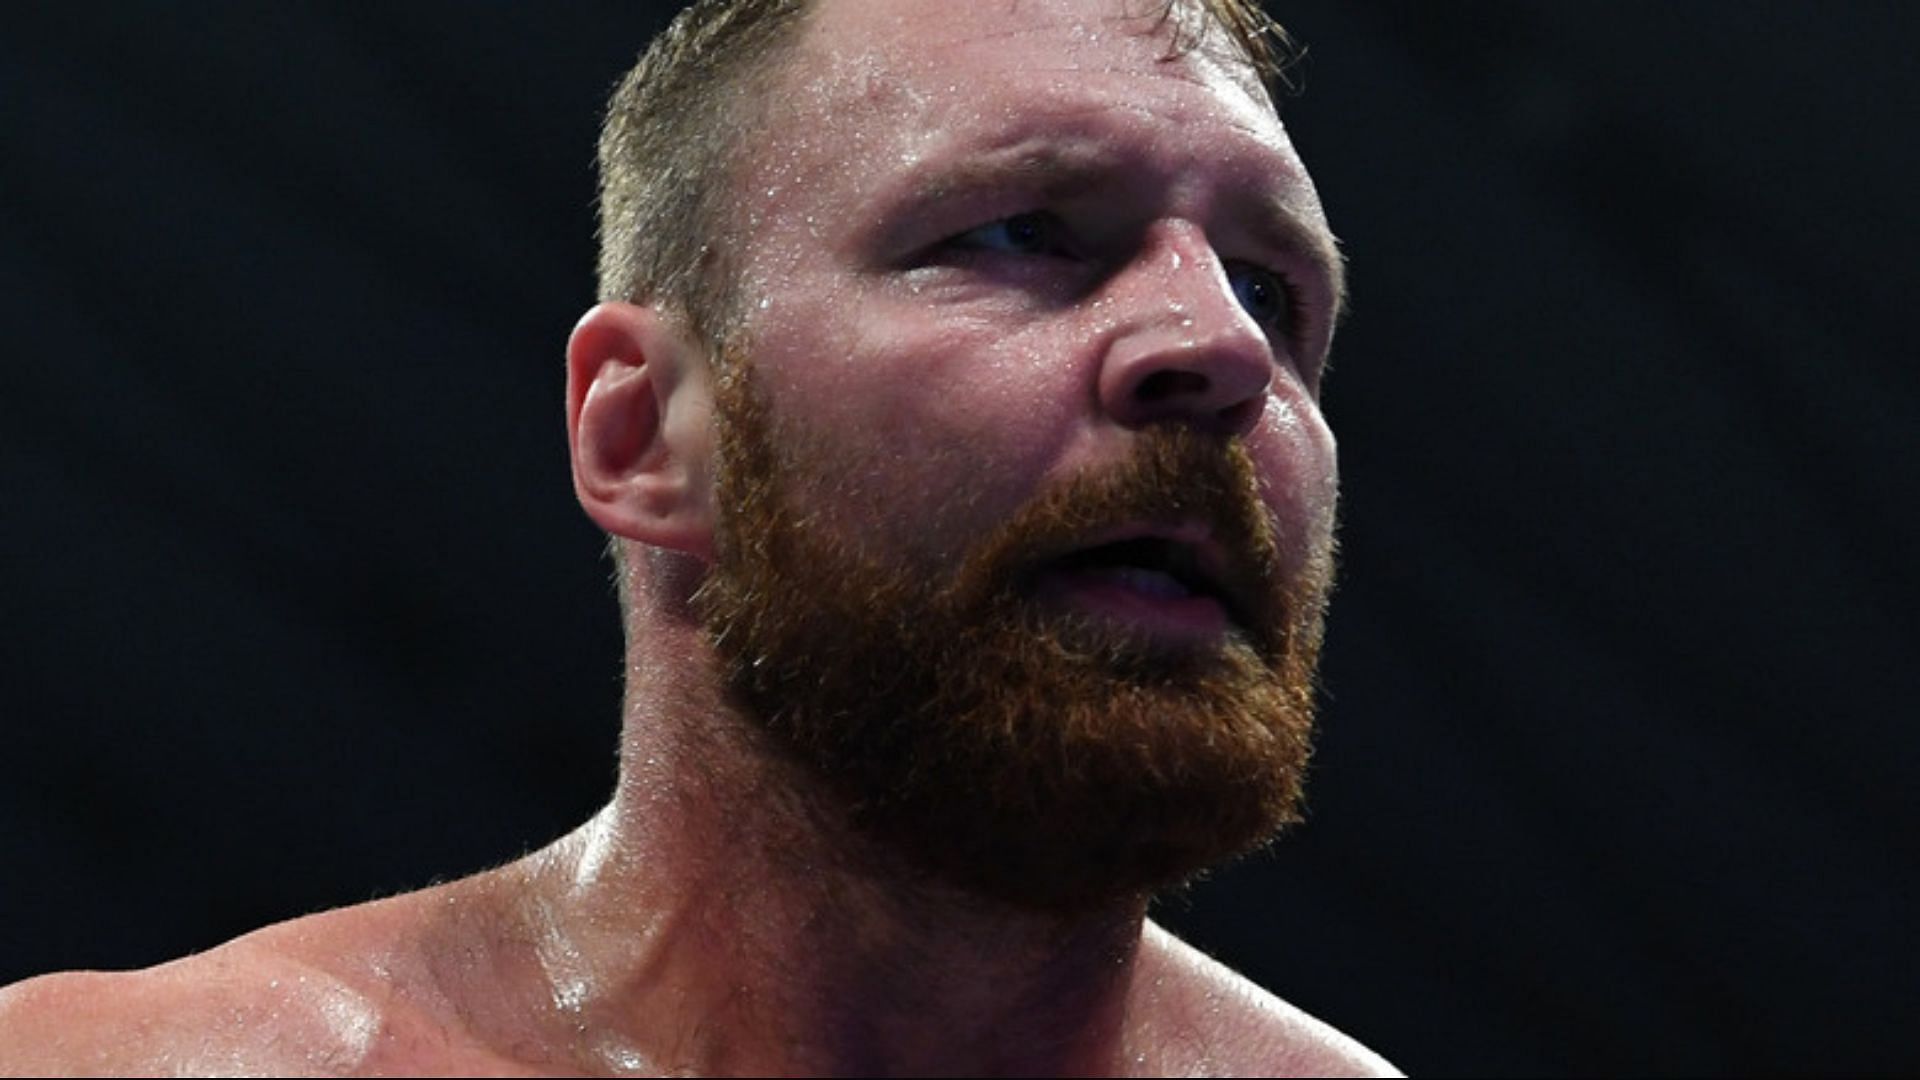 Jon Moxley is the former AEW World Champion